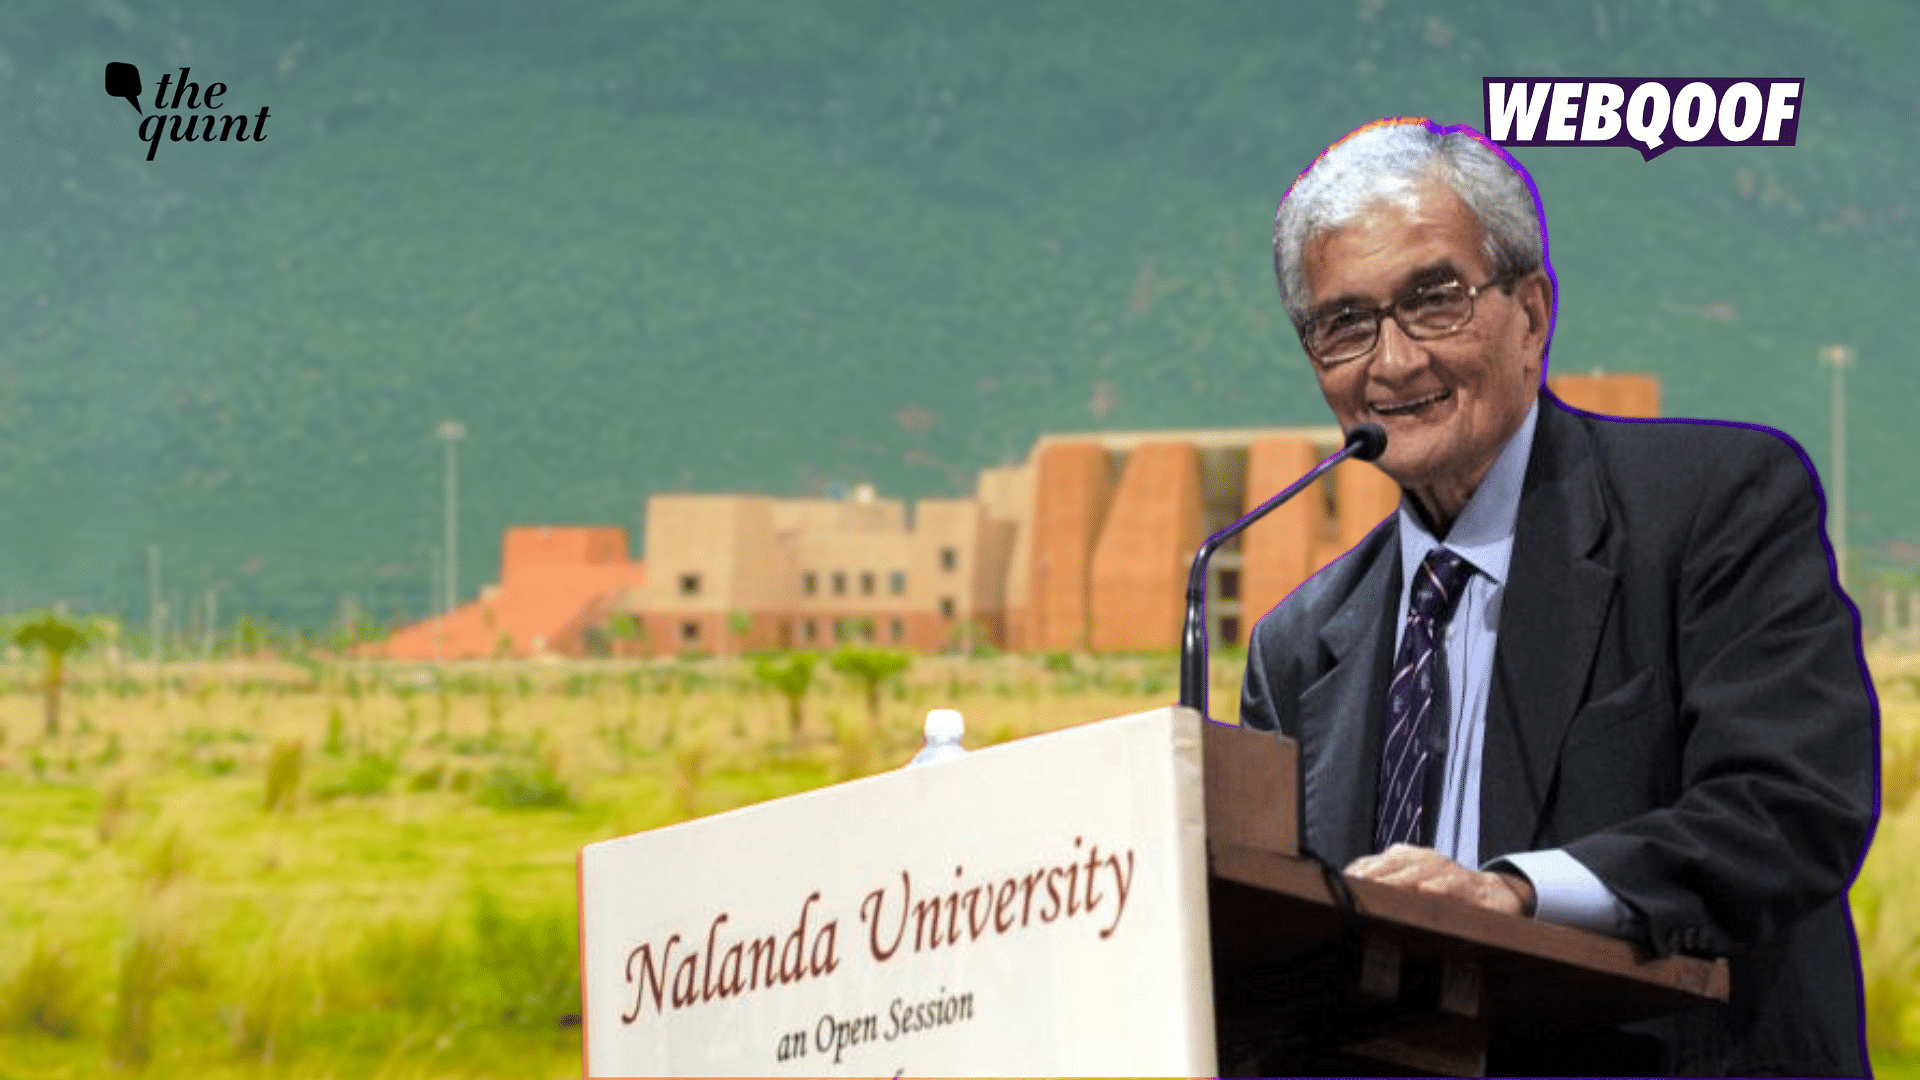 <div class="paragraphs"><p>The viral post makes several false claims about former PM Manmohan Singh, Nobel Laureate Amartya Sen, and their association with the Nalanda University.</p></div>